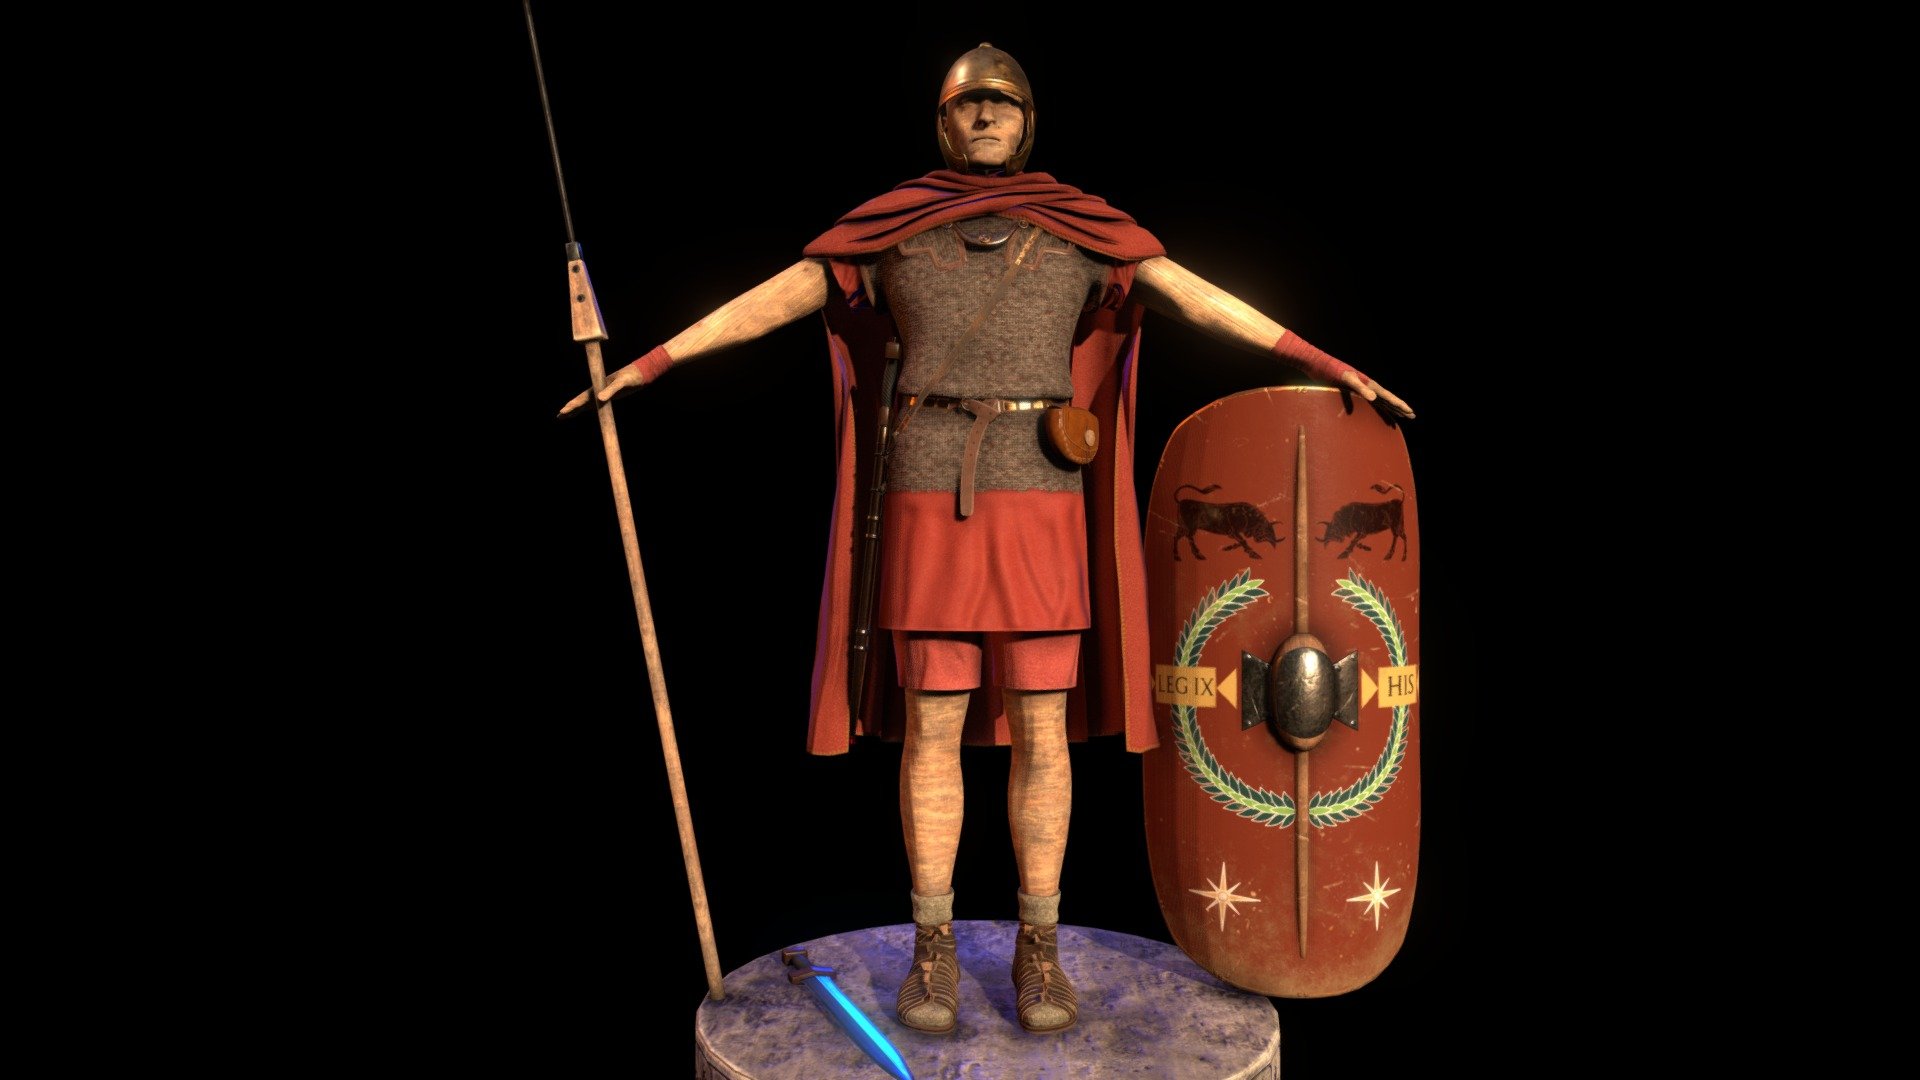 A model of Caesarean legionnary, those commanded by Julius Caesar during his gaulish war&hellip; And the final stage of the evolution of legionnaires before the breastplates as we imagine them today.



Theses equipments were in use approximately from the reforms of Marius in 107 BC -&gt; to the beginning of the Principate around 27 AD.



After the dissolution of ranks in the army (Hastati, Velites, Principes, Triarii) and the opening of recruitment to larger social classes along with the provision of equipment at the Consul's expense&hellip; All of this led to an overall standardization within the ranks of the roman army.



The main goal was to create an army without class distinction, where 5000 soldiers would be more or less equal to each other.



/ ----------- Characteristics -------------- /

PBR Material

Majority of textures are in 4K, 2K.
 - Caesarian Legionary #1 - Buy Royalty Free 3D model by The Ancient Forge (Svein) (@svein) 3d model